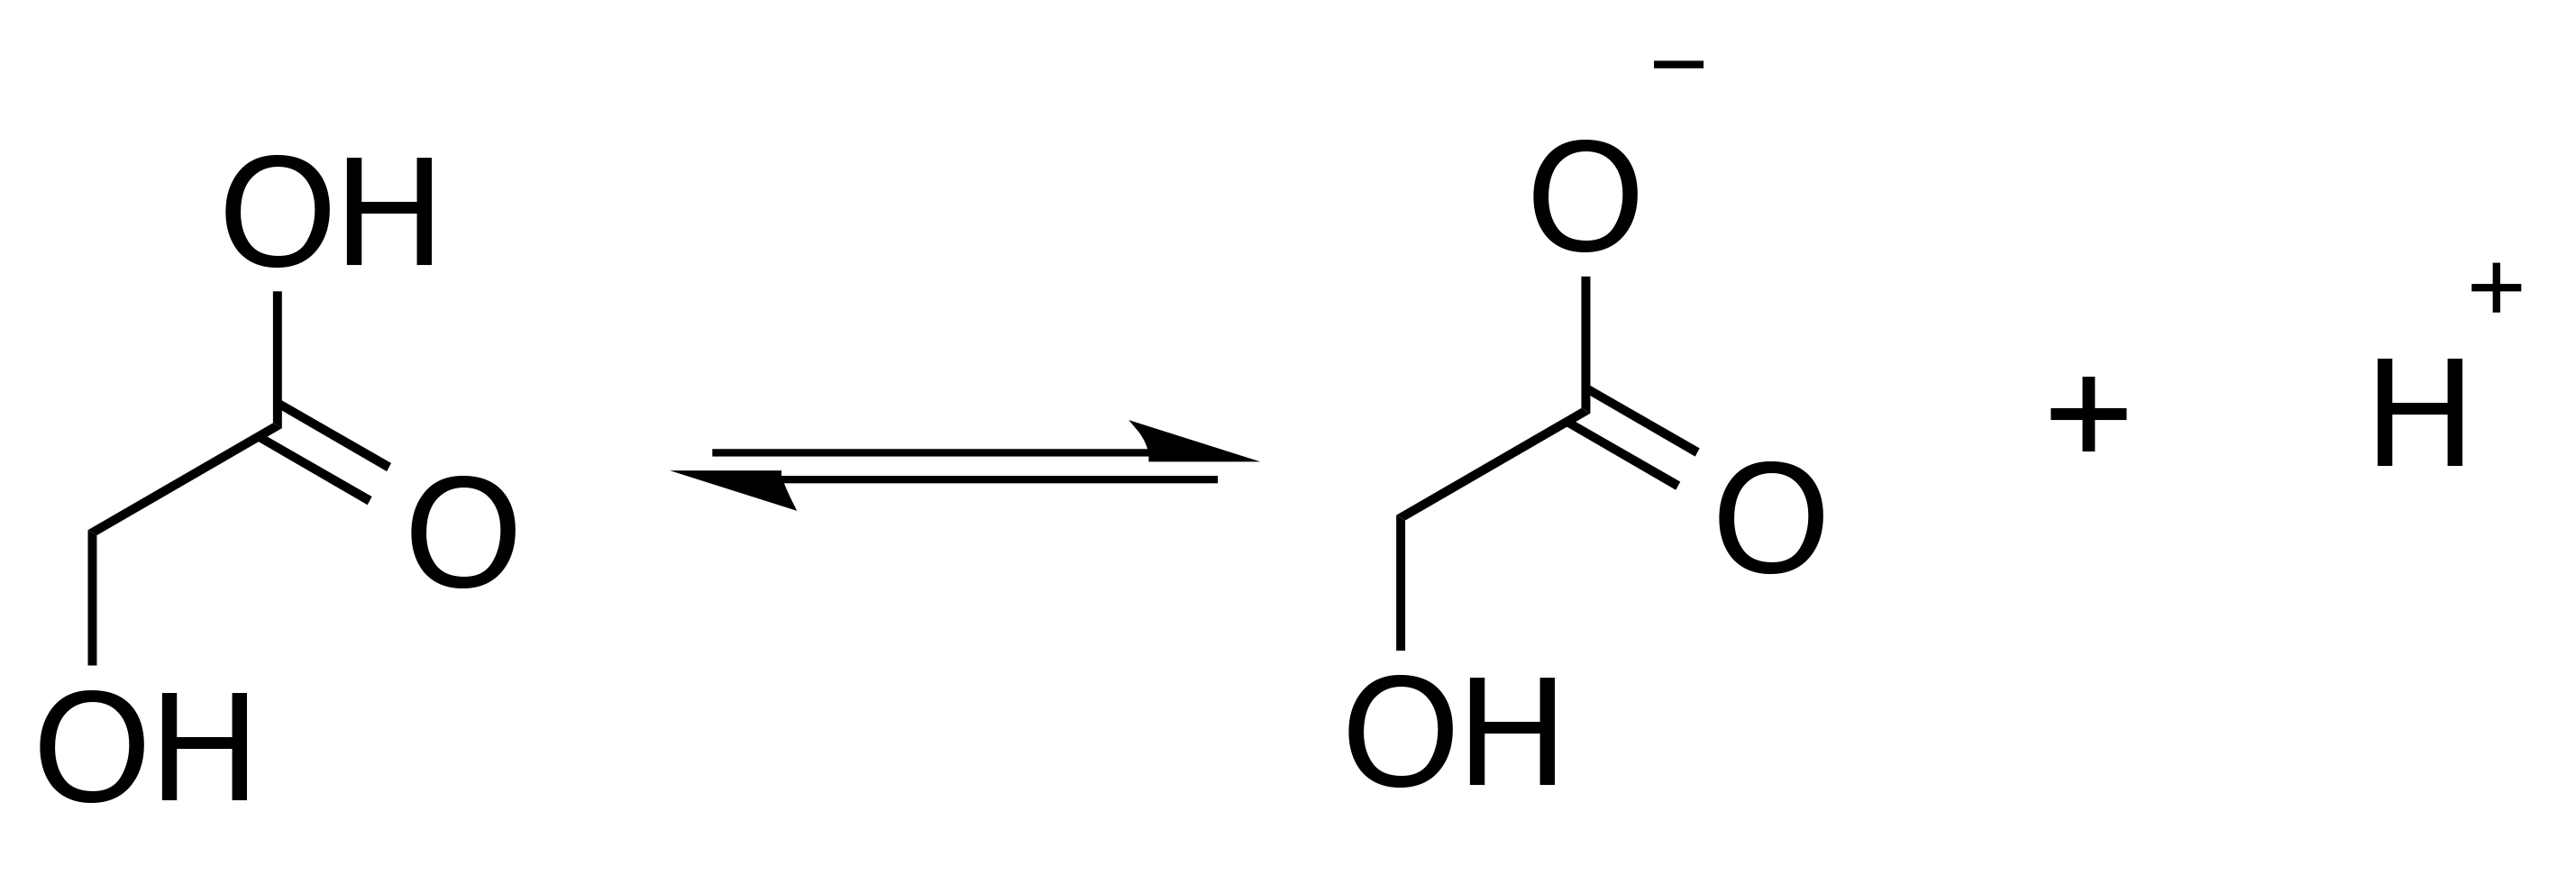 equilibrium reaction between free glycolic acid and the ionized form